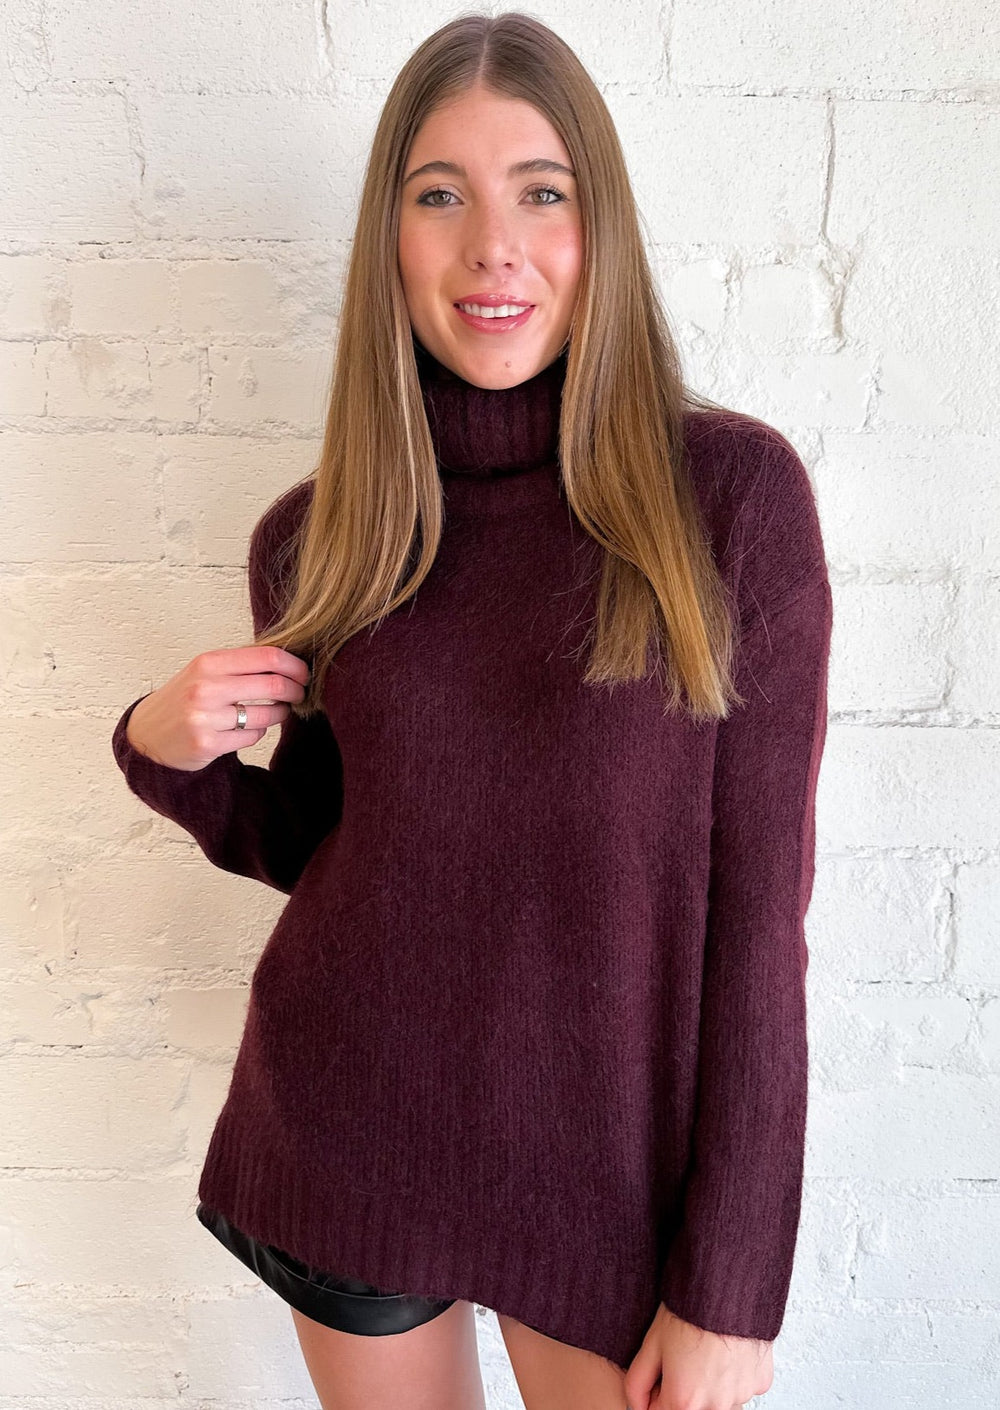 Frosted Cranberry Sweater, Tops, Adeline, Adeline, dallas boutique, dallas texas, texas boutique, women's boutique dallas, adeline boutique, dallas boutique, trendy boutique, affordable boutique